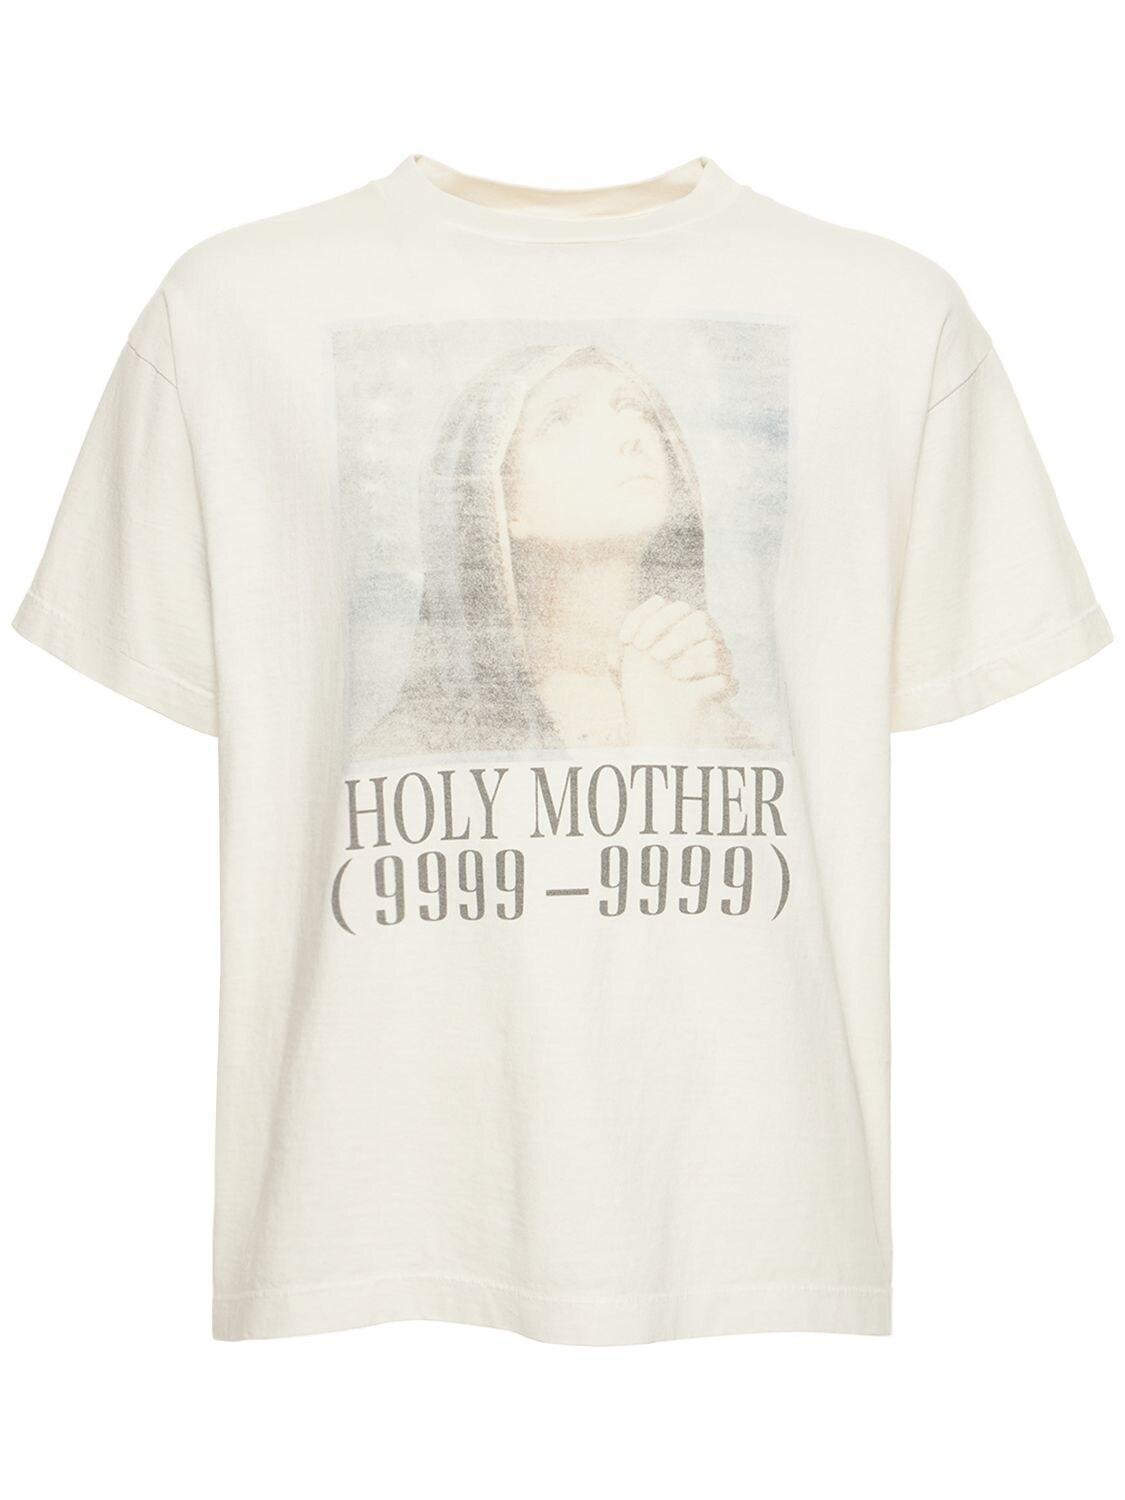 Saint Michael Holy Mother Printed Cotton T-shirt in White for Men 